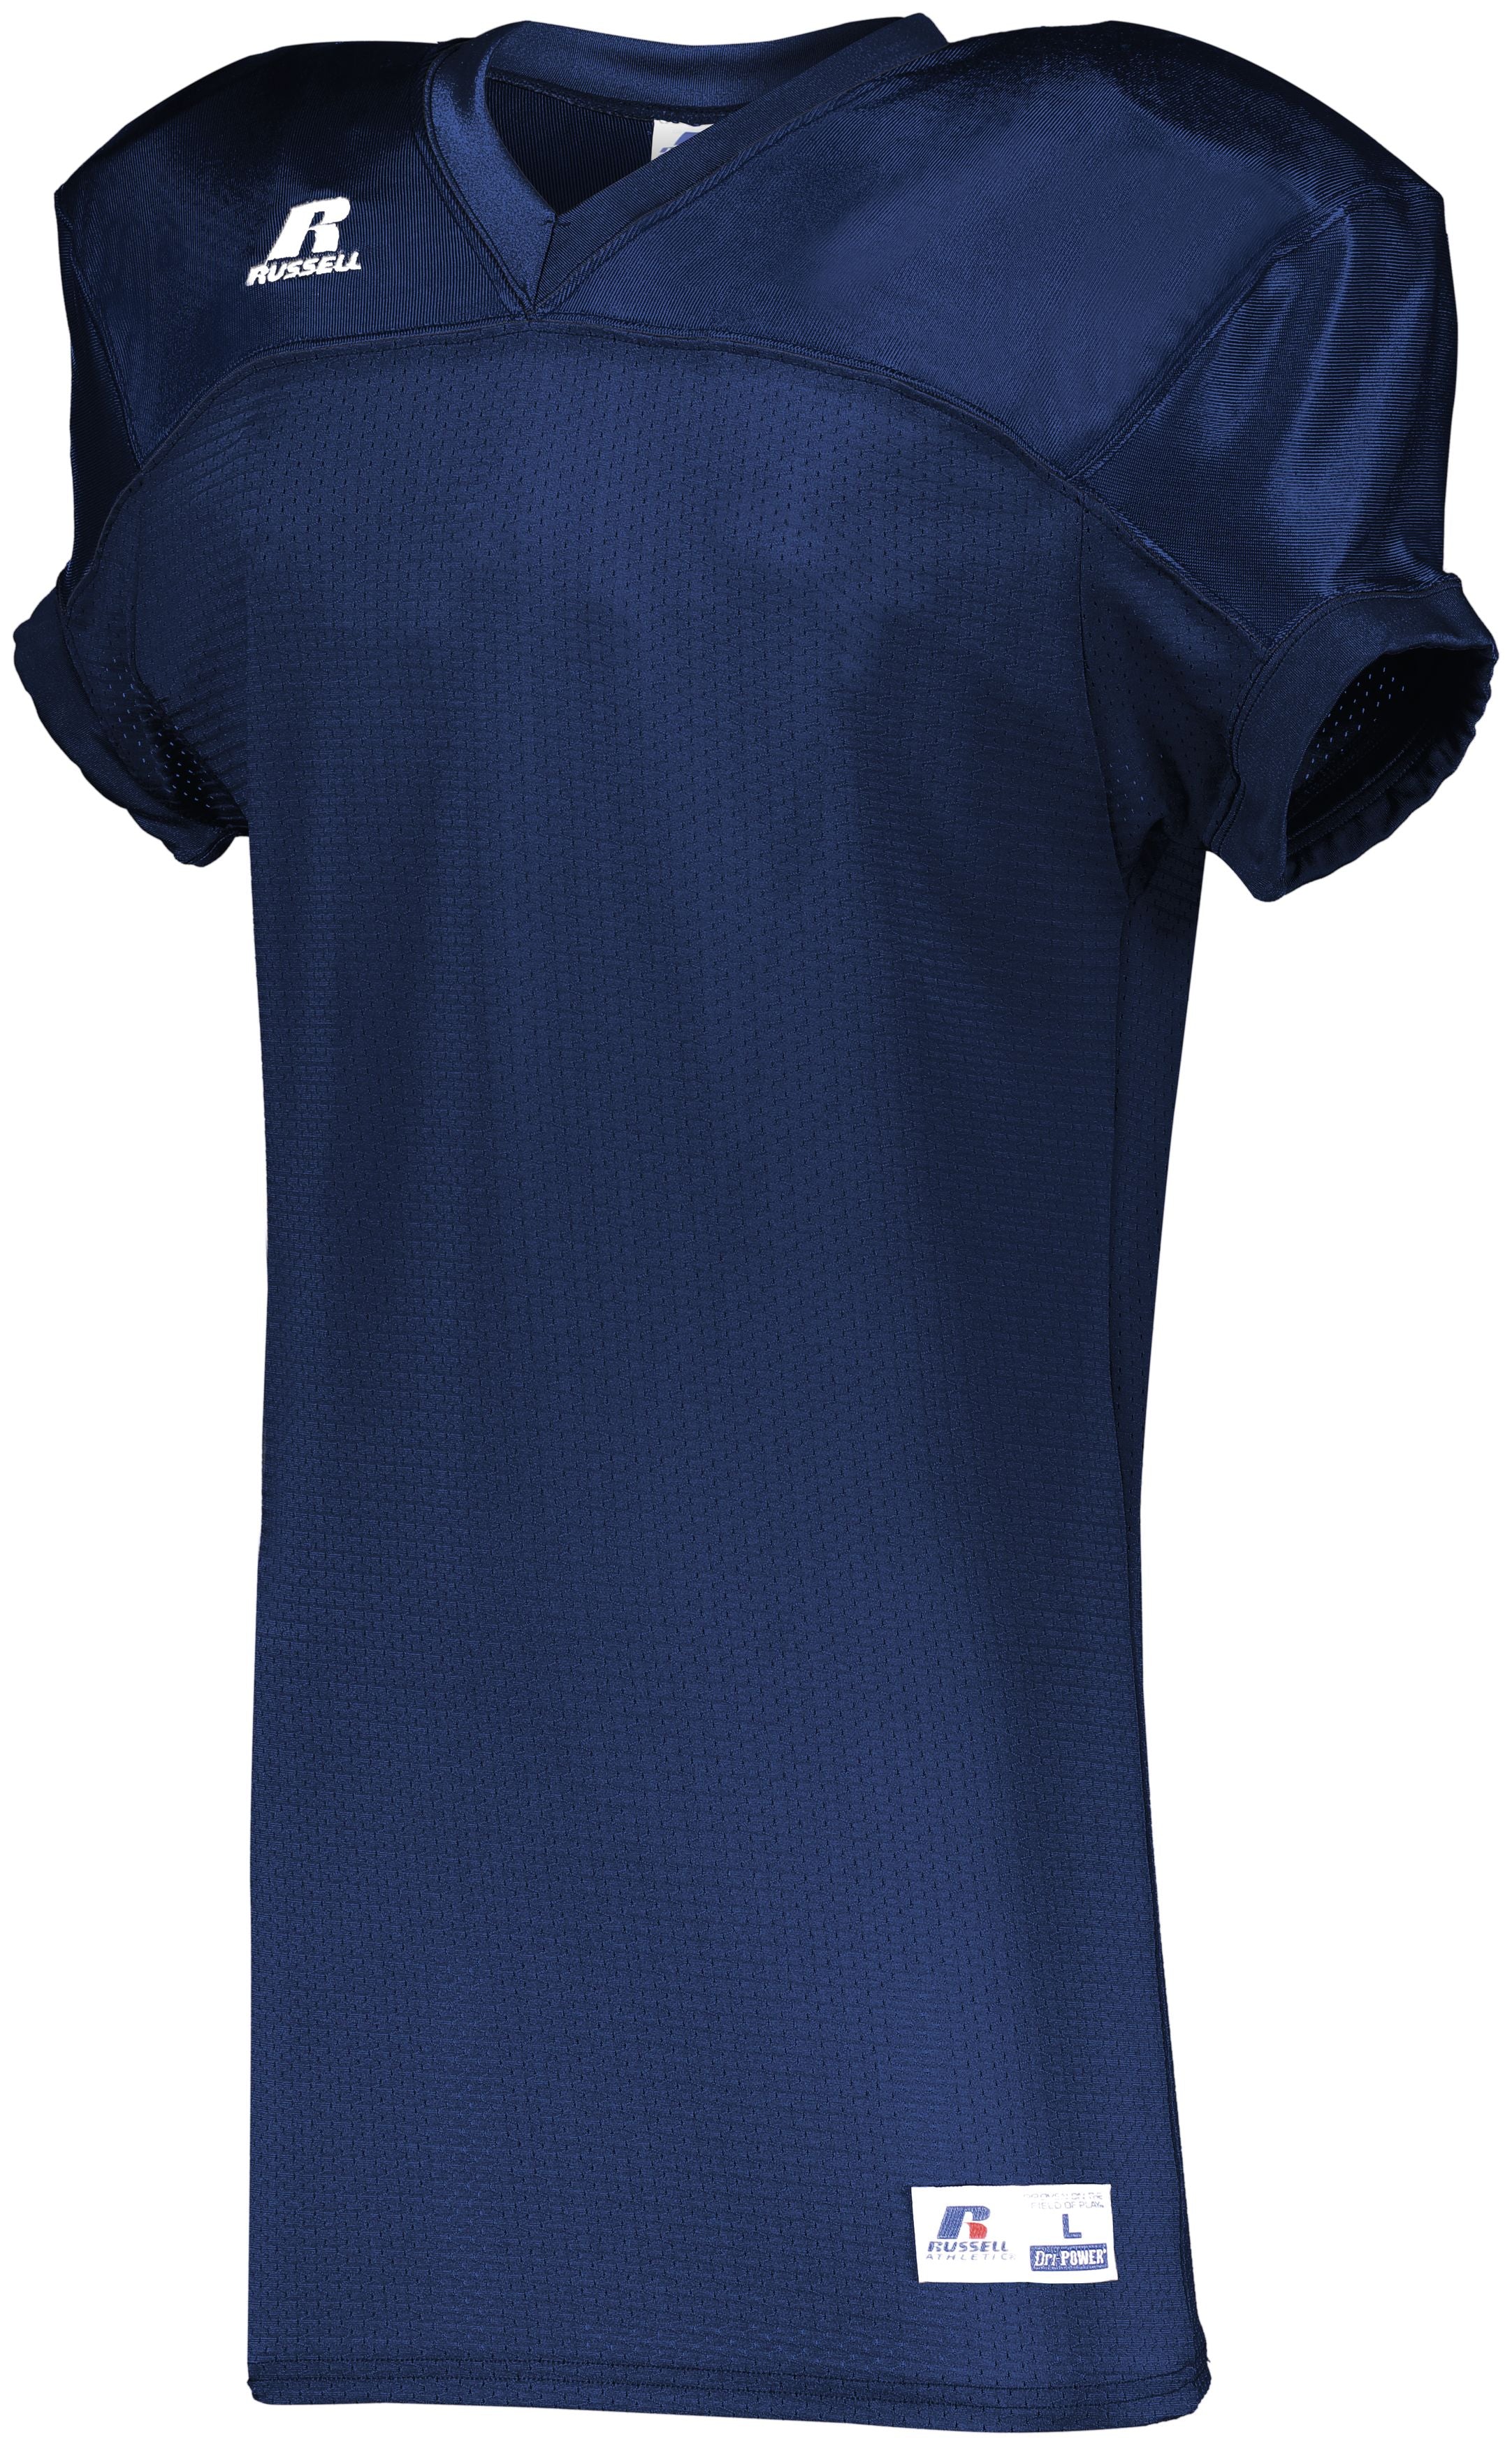 Russell Athletic Stretch Mesh Game Jersey in Navy  -Part of the Adult, Adult-Jersey, Football, Russell-Athletic-Products, Shirts, All-Sports, All-Sports-1 product lines at KanaleyCreations.com